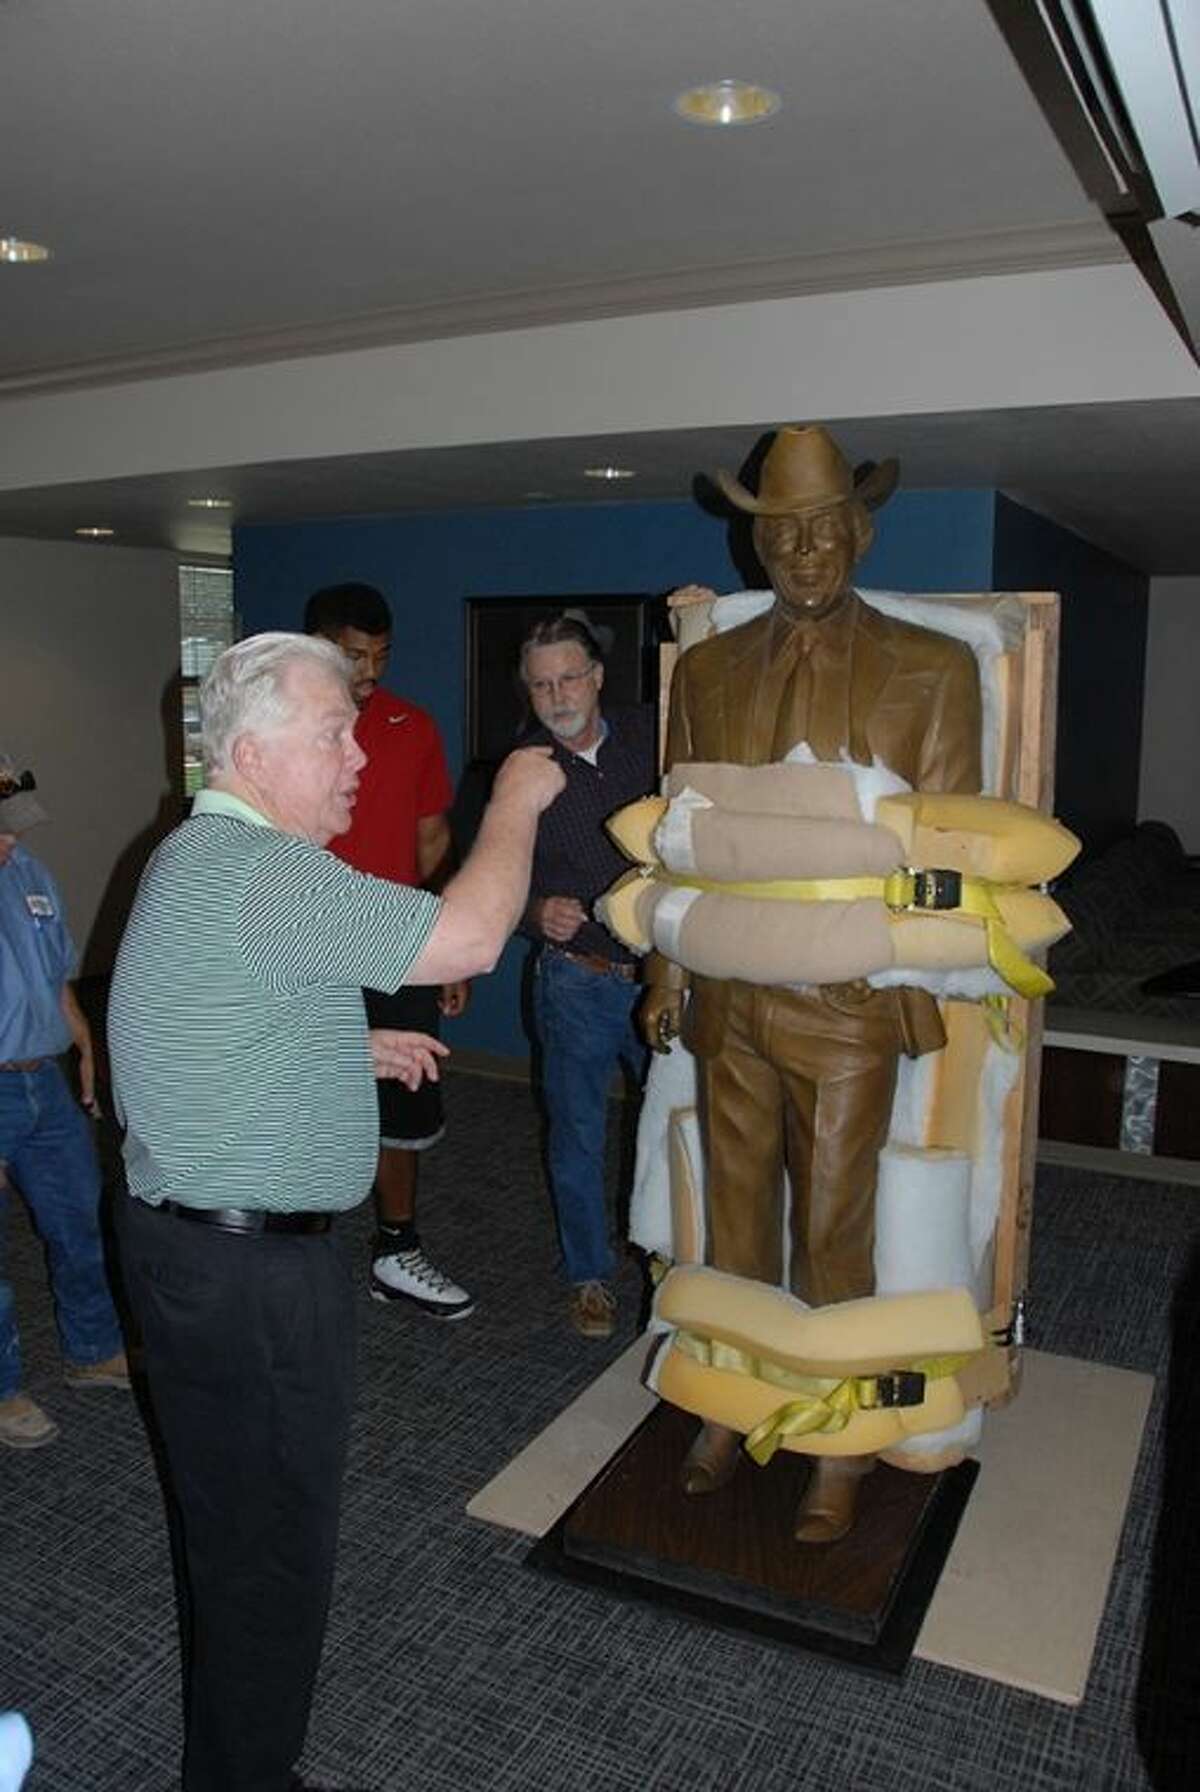 t University Executive Director of Advancement Mike Melcher instructs workers on where to place the 800-pound Jimmy Dean statue in its temporary home in Jimmy Dean Hall. The statue will be moved to the Jimmy Dean Museum when it is complete in August 2015.